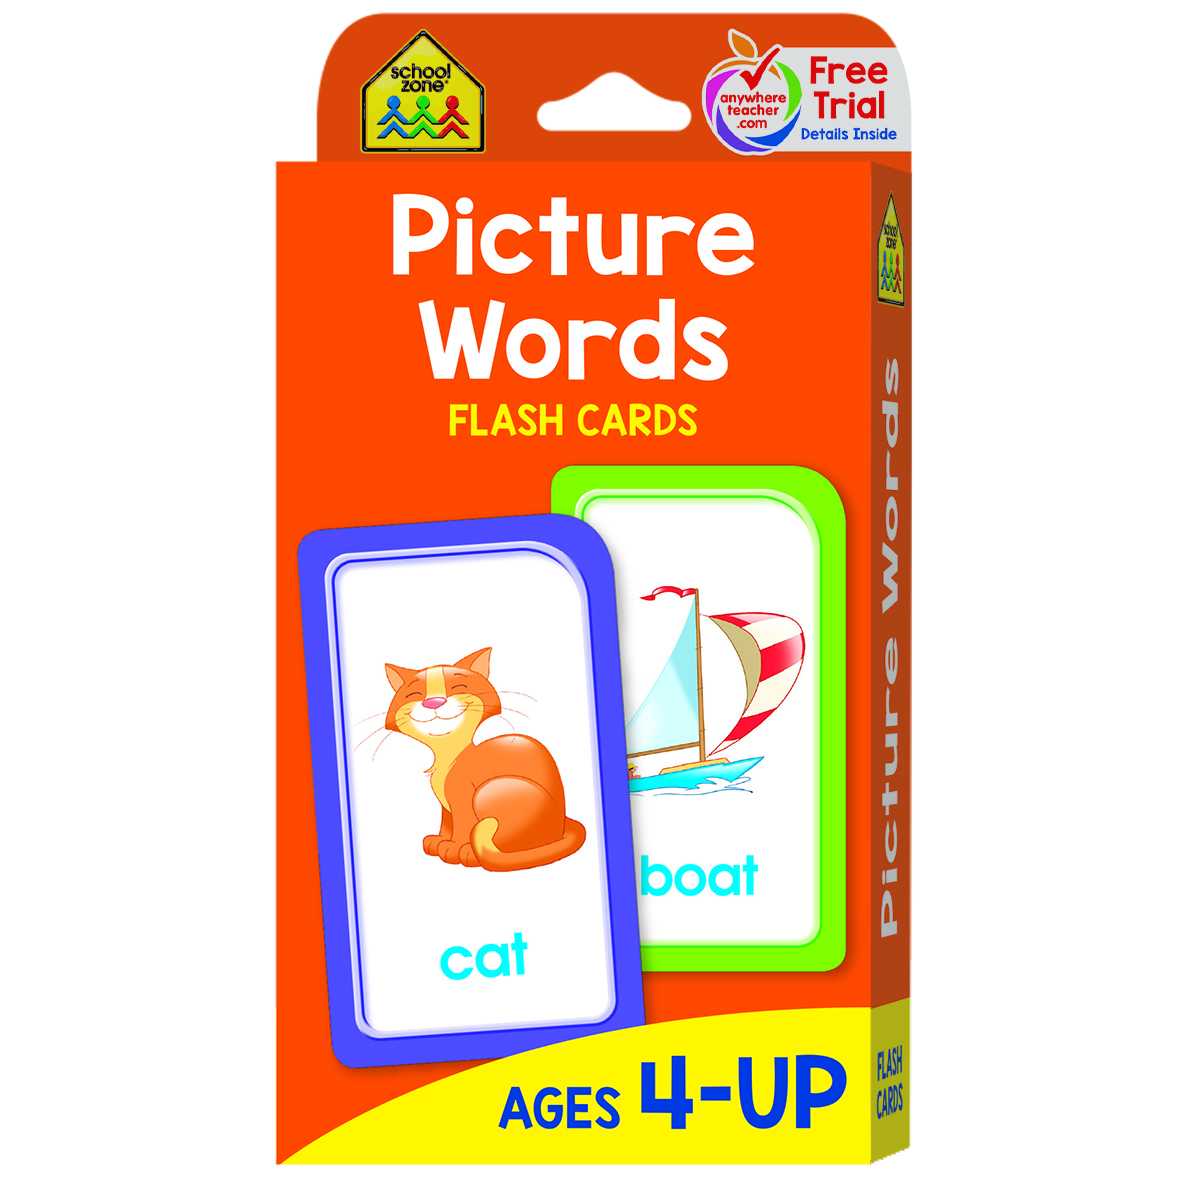 wholesale-picture-words-flash-cards-dollardays